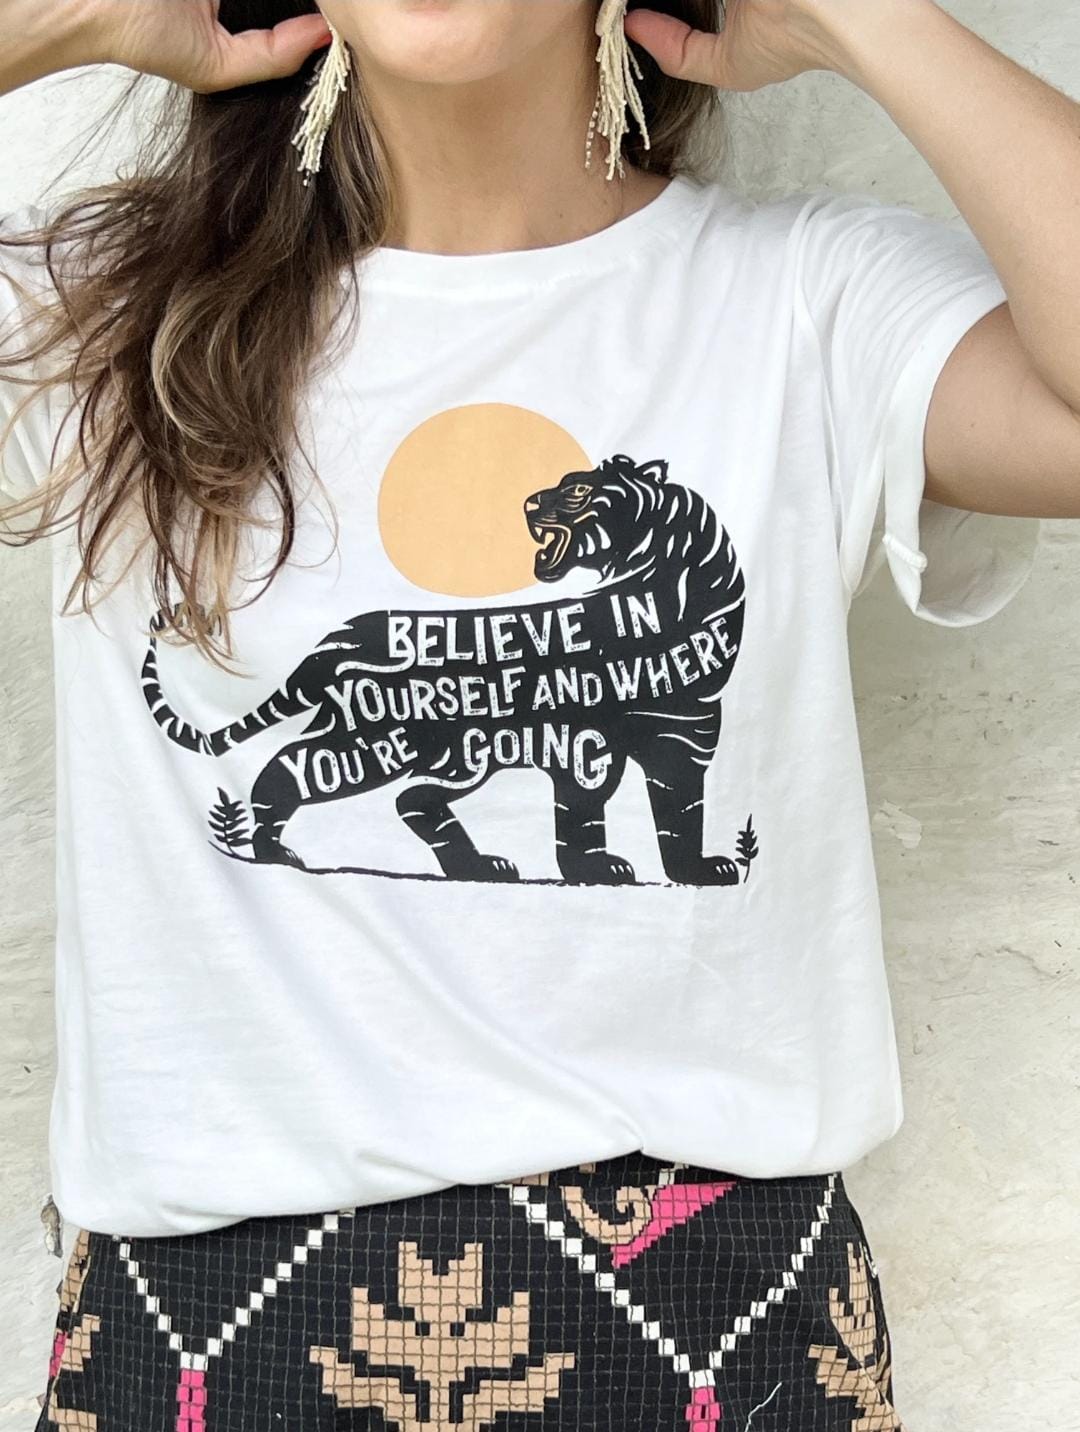 Believe In Yourself T-Shirt